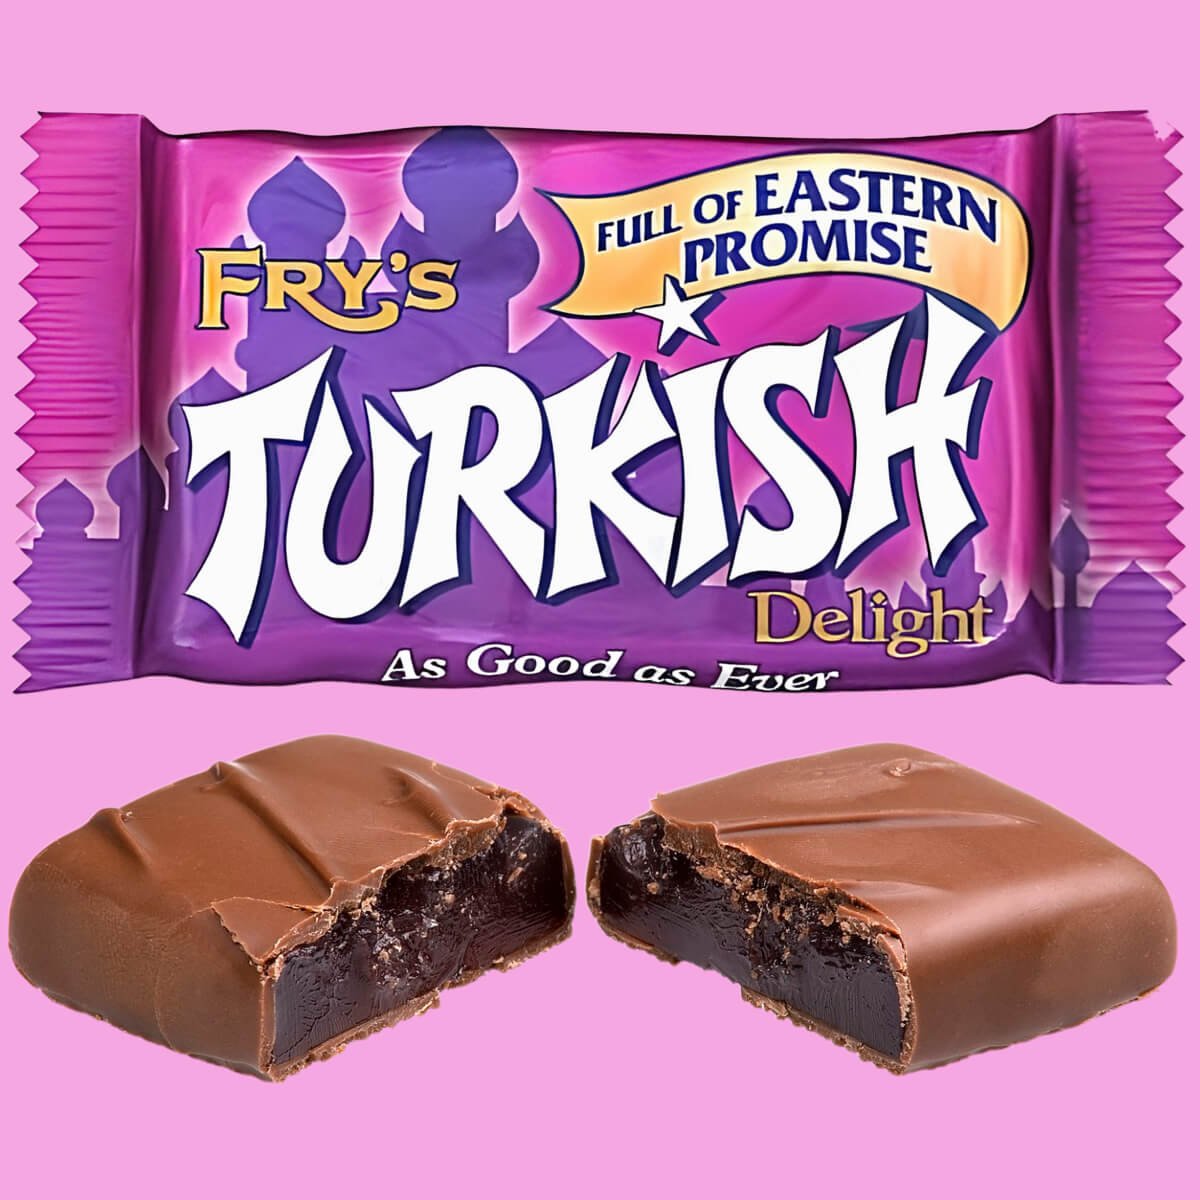 Two bars of Fry's Turkish Delight, with and without wrapper.